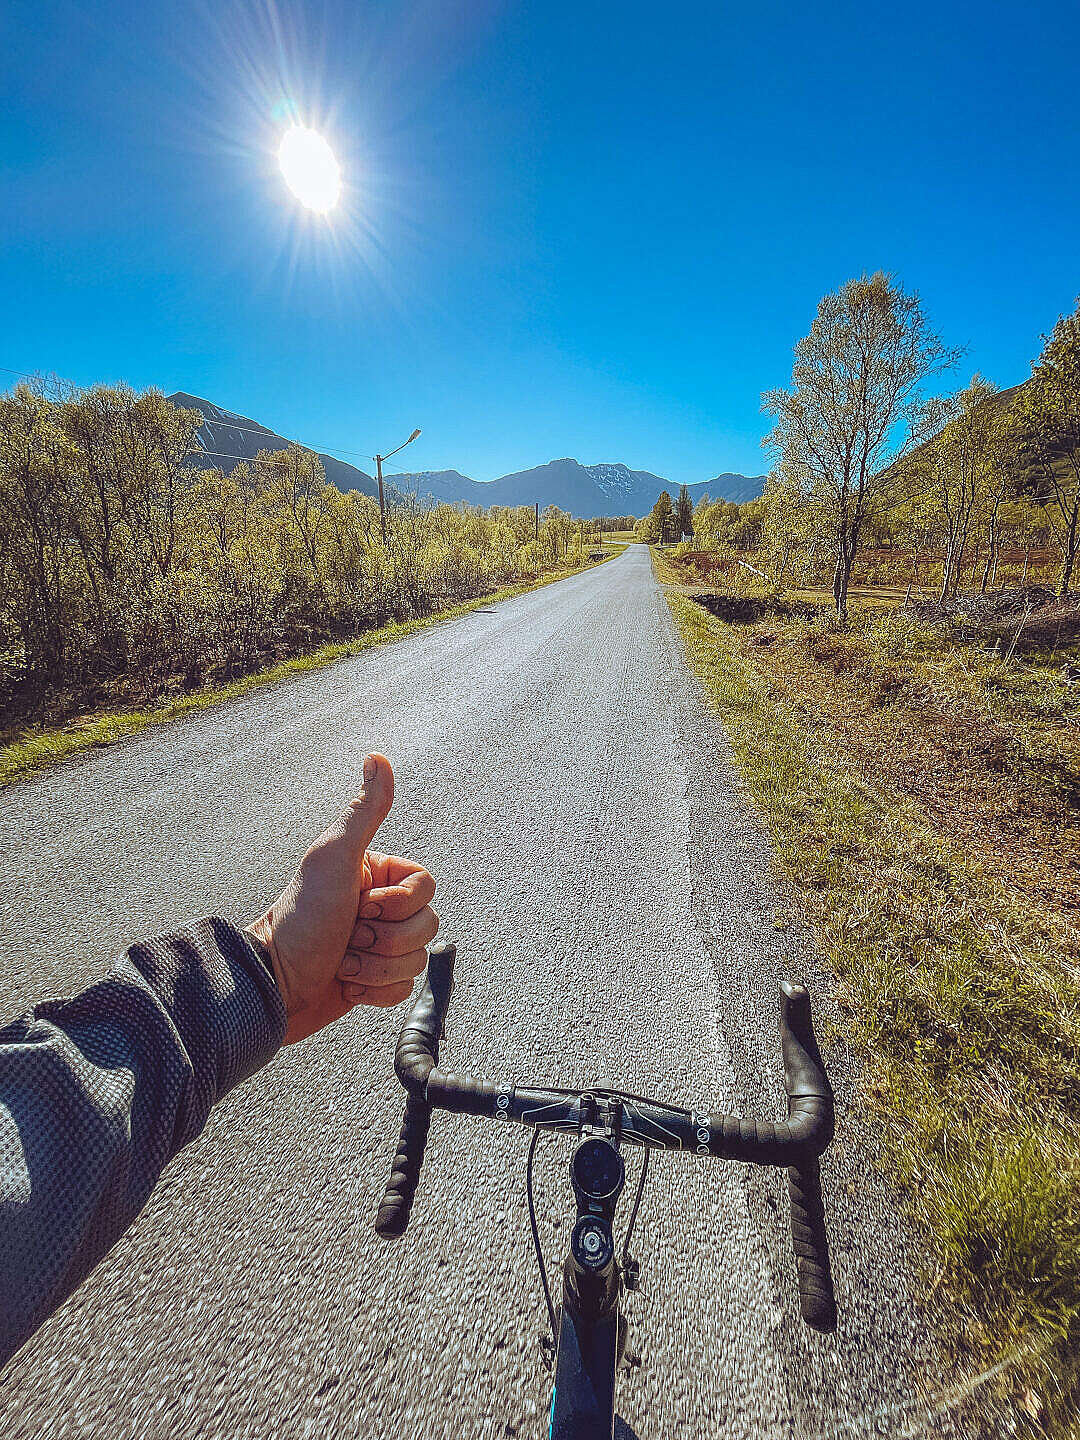 Download Man Enjoying Sunny Weather on a Bicycle FREE Stock Photo